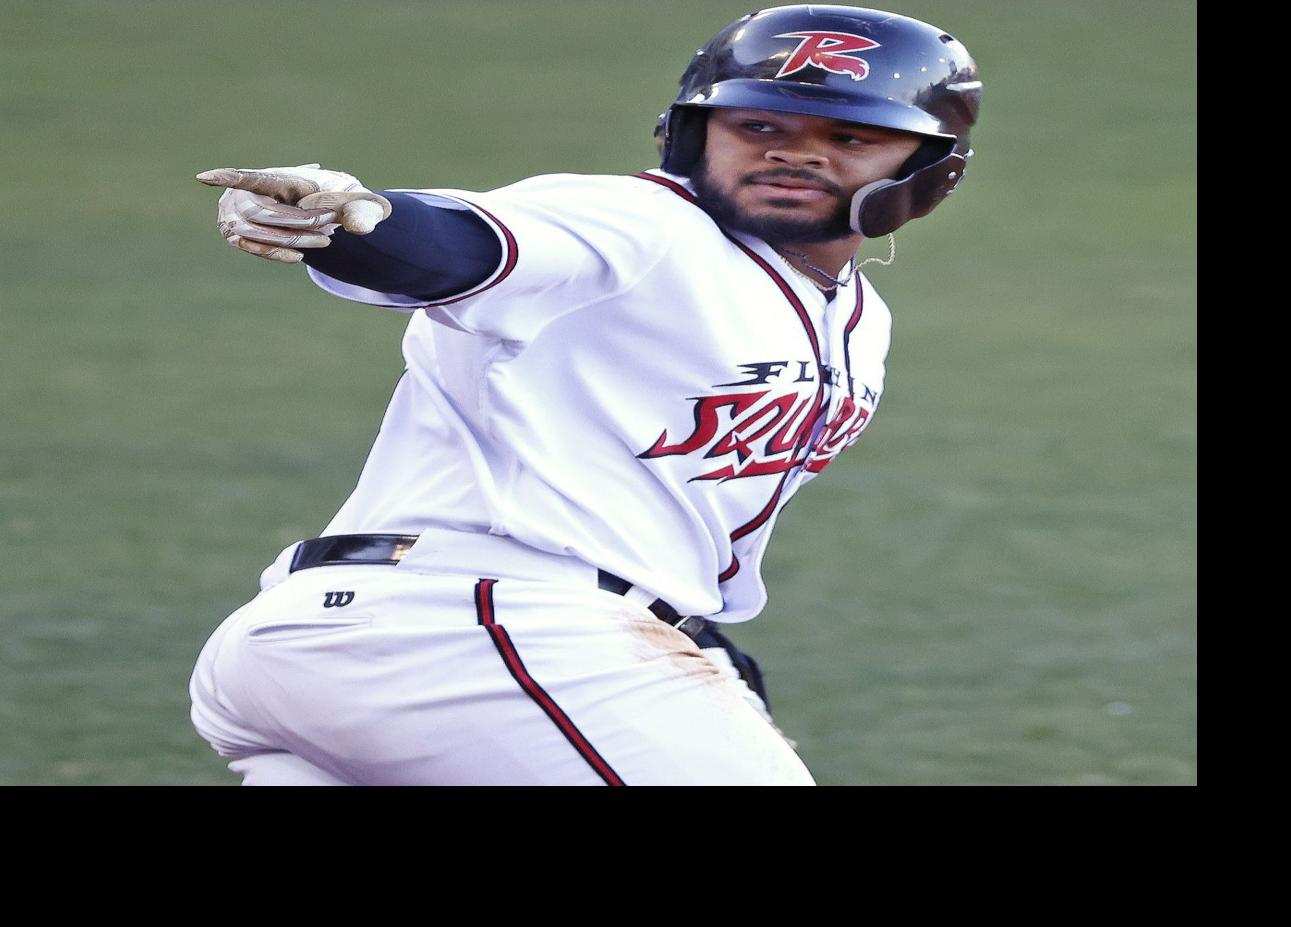 Flying Squirrels season preview: Heliot Ramos heads San Francisco